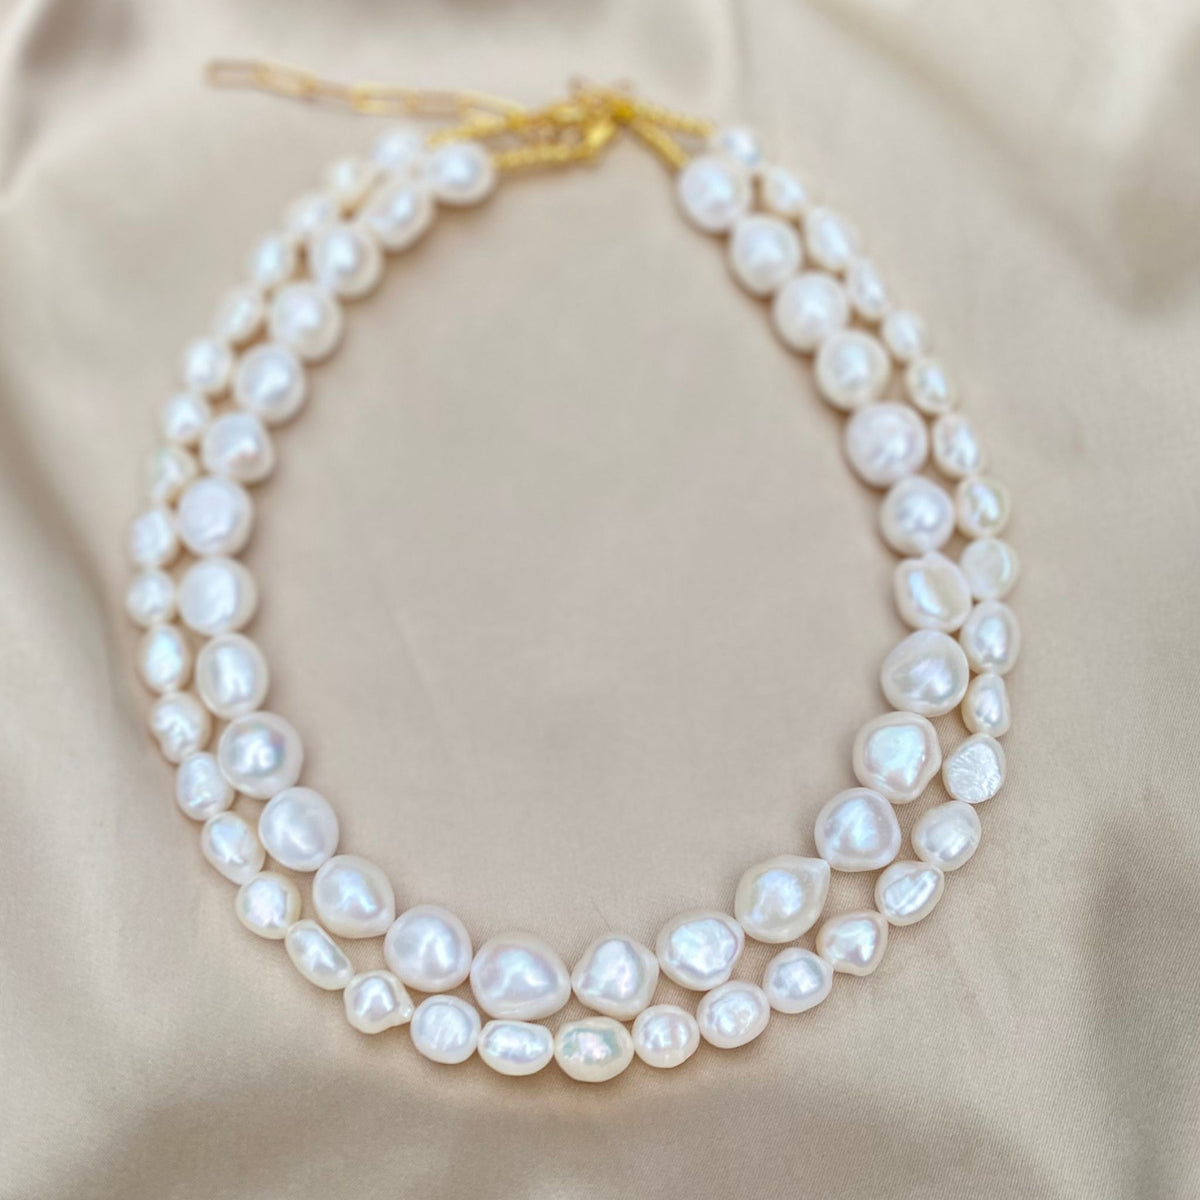 Baroque freshwater pearl chokers with 18K gold vermeil clasp